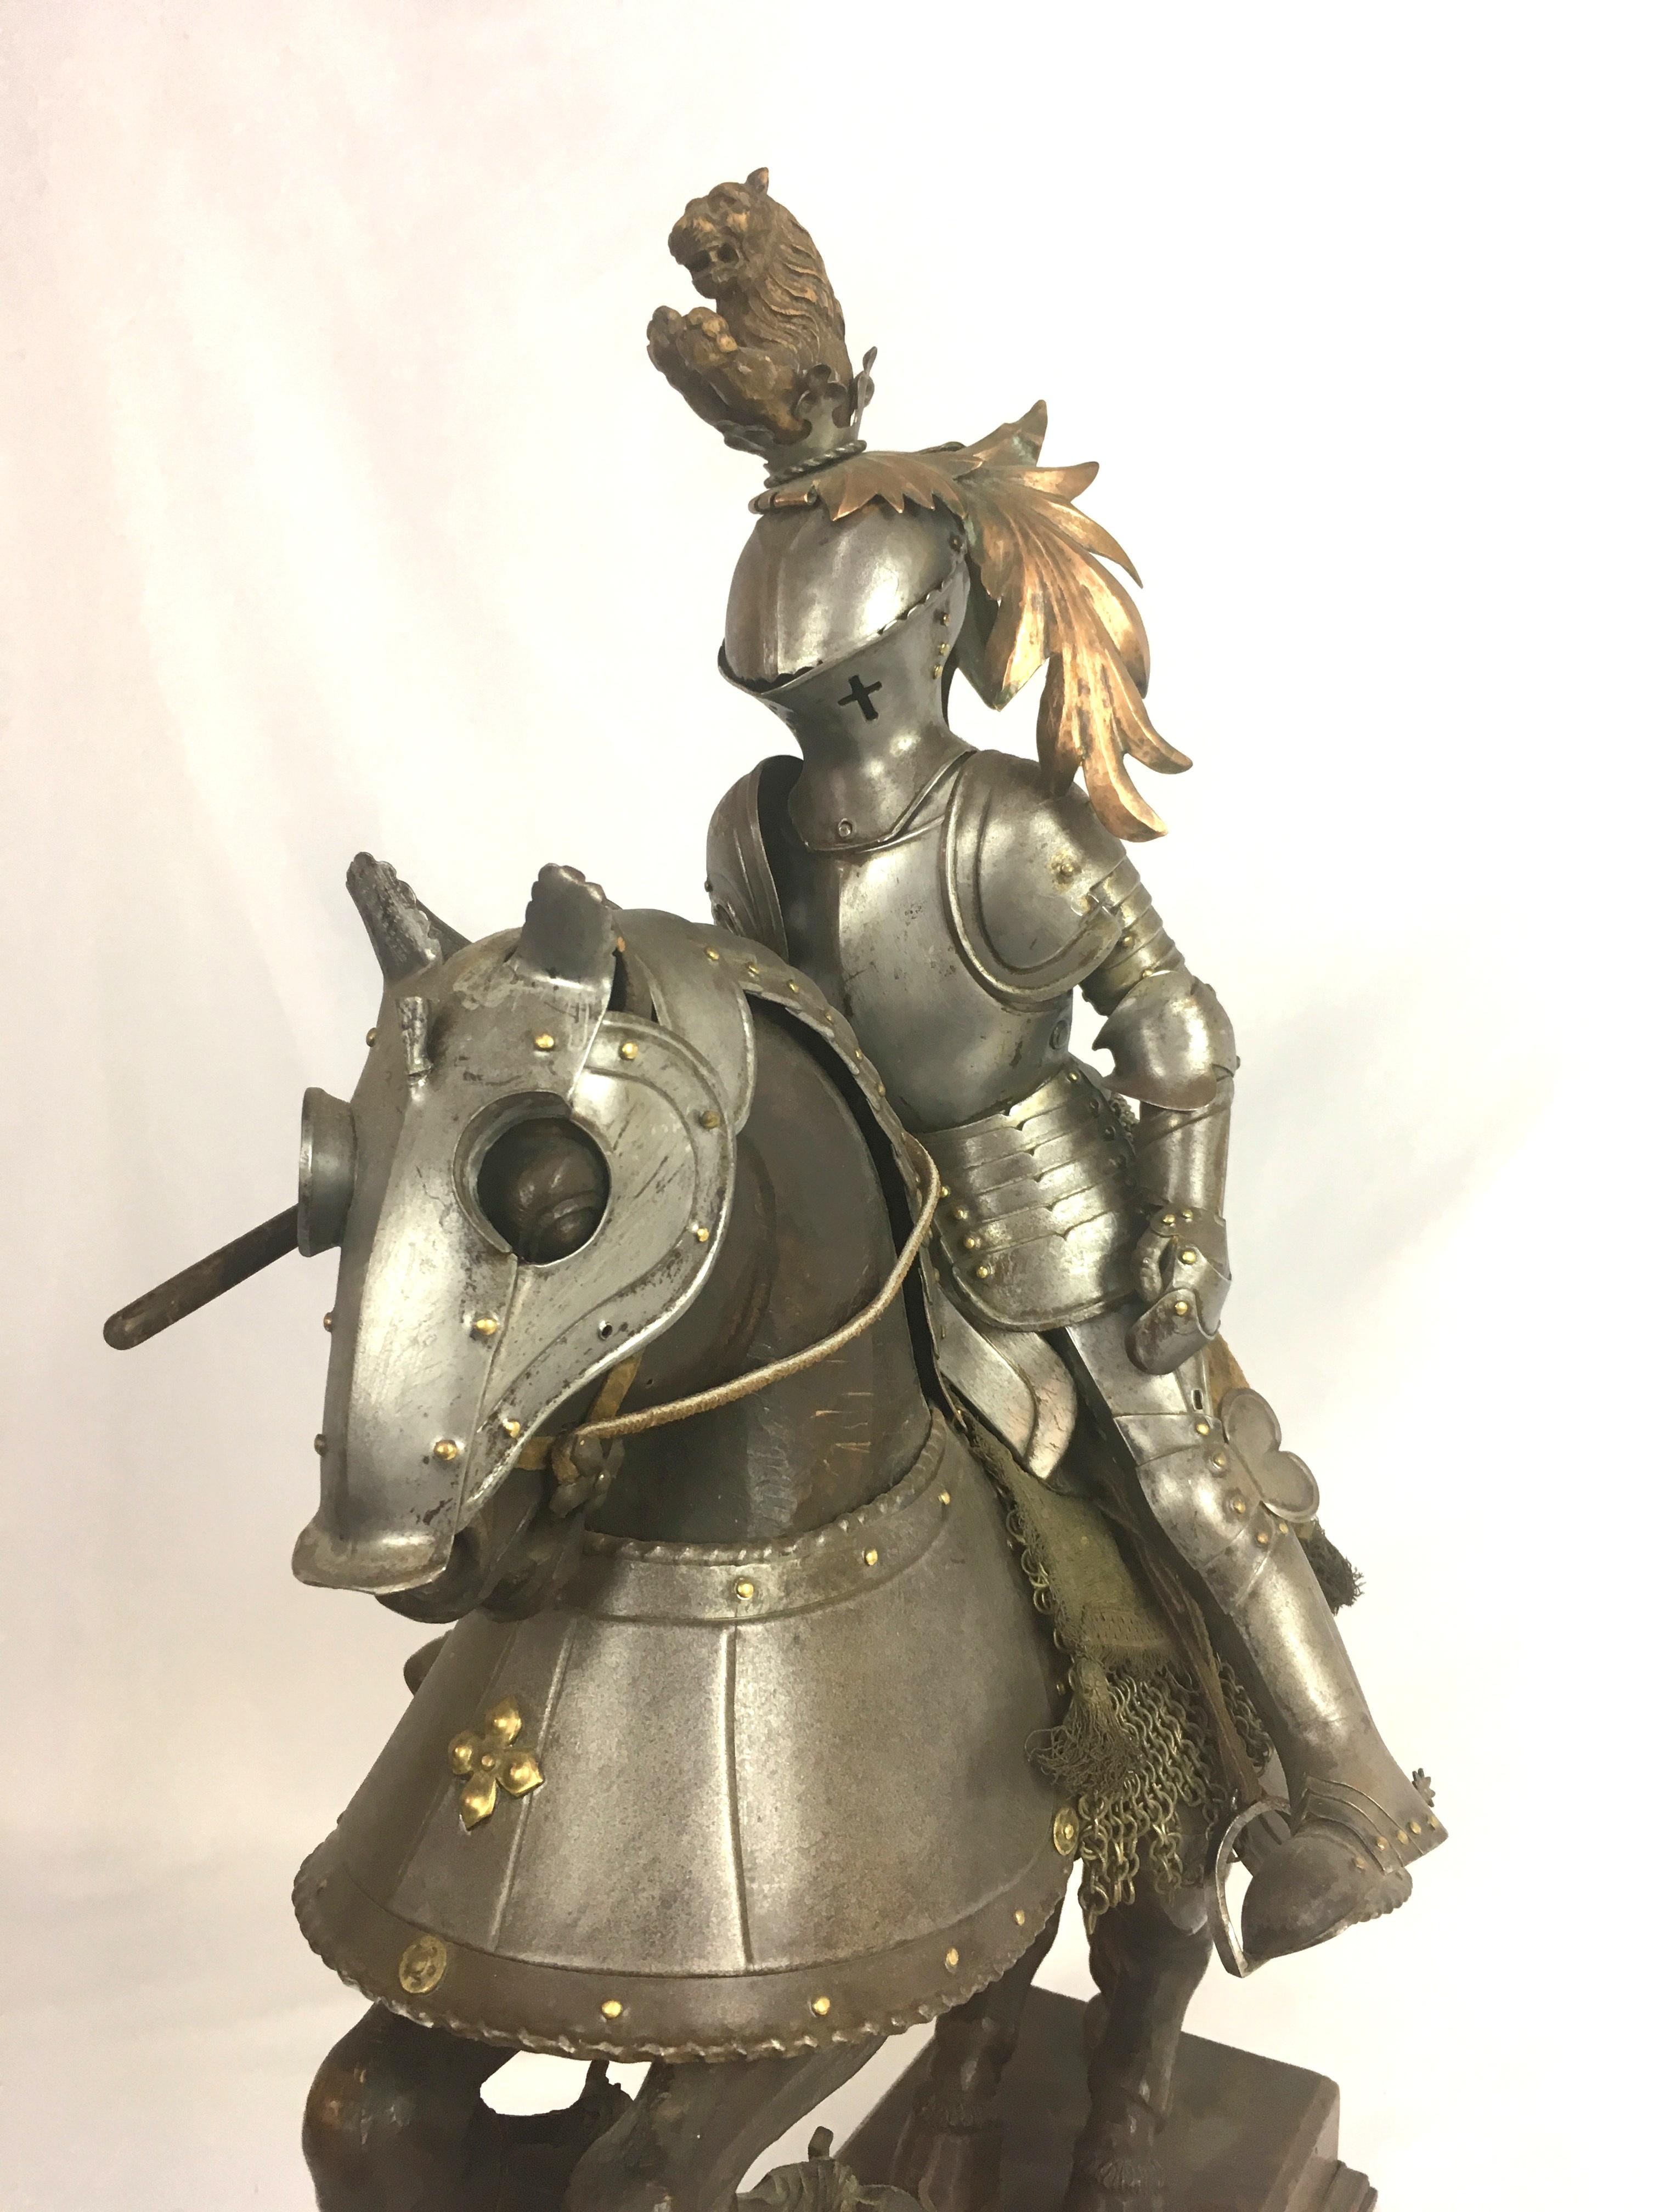 19th Century Metal and Wooden Model of 15th Century Armored Knight on Horseback In Good Condition For Sale In Portland, OR